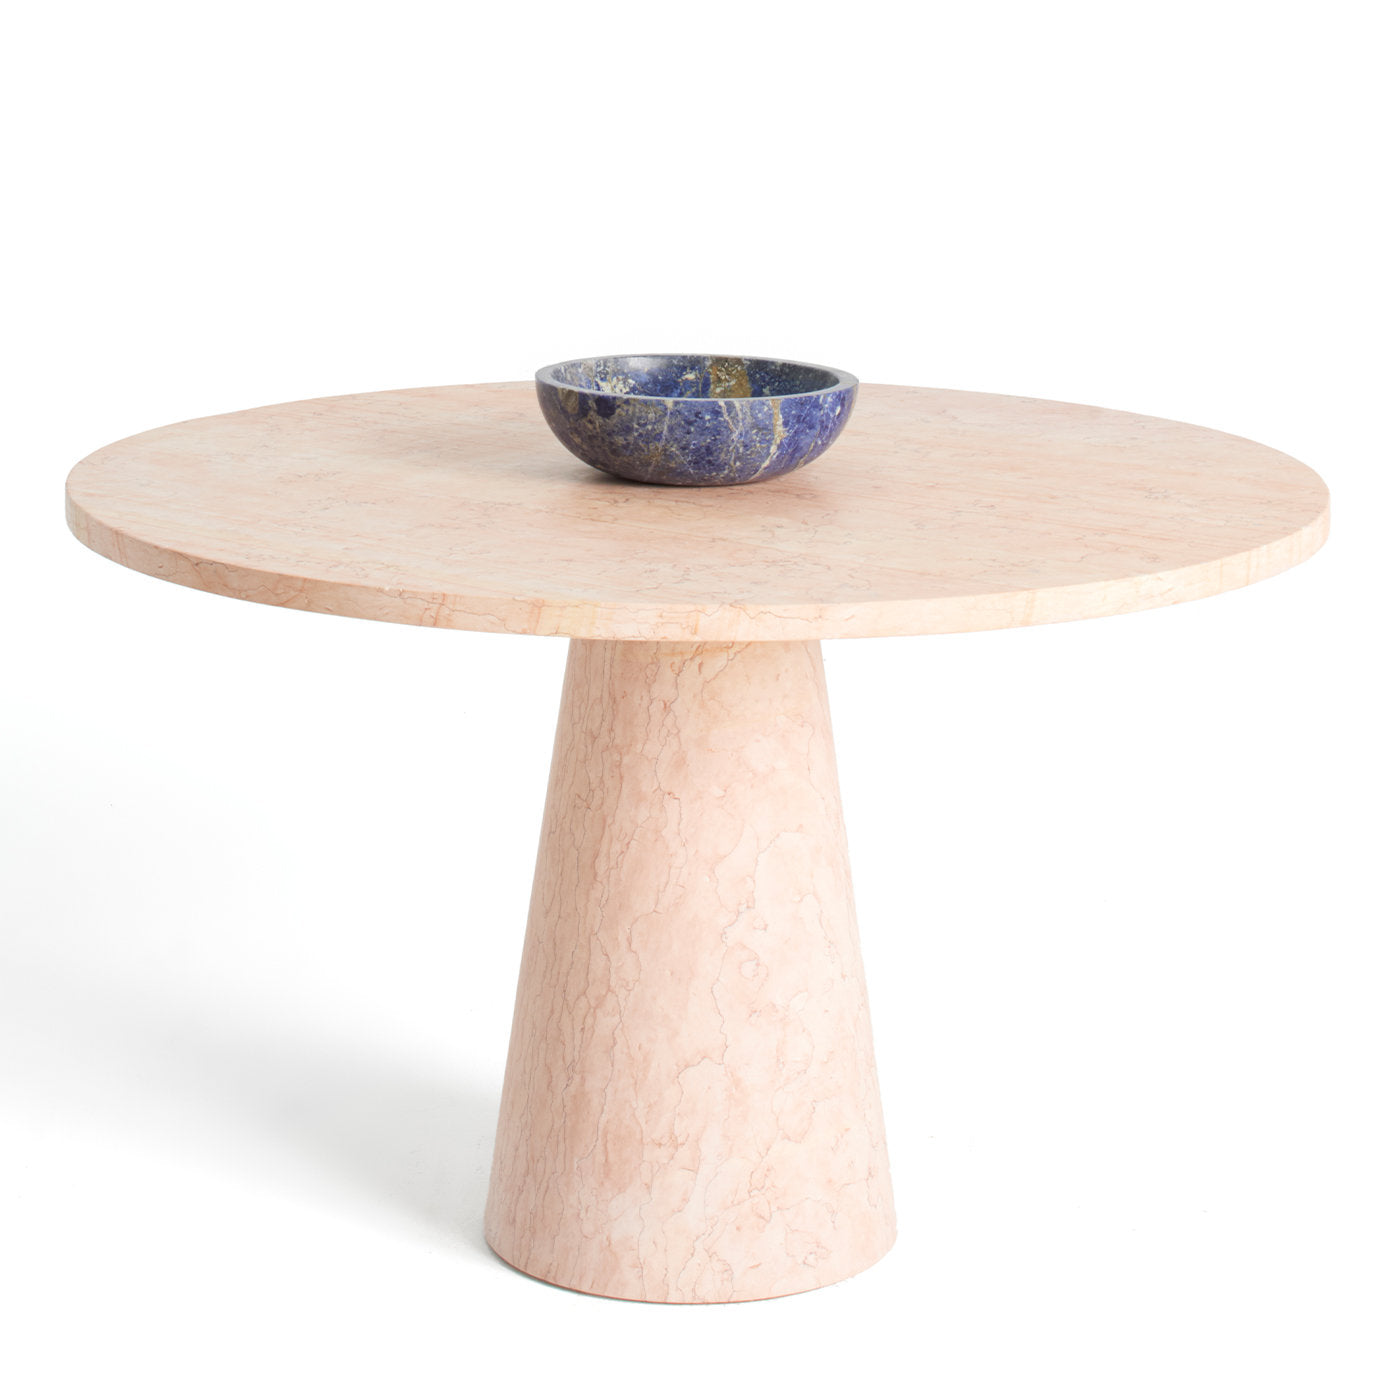 Inside Out Round Pink Egyptian Dining Table by Karen Chekerdjian - Alternative view 1